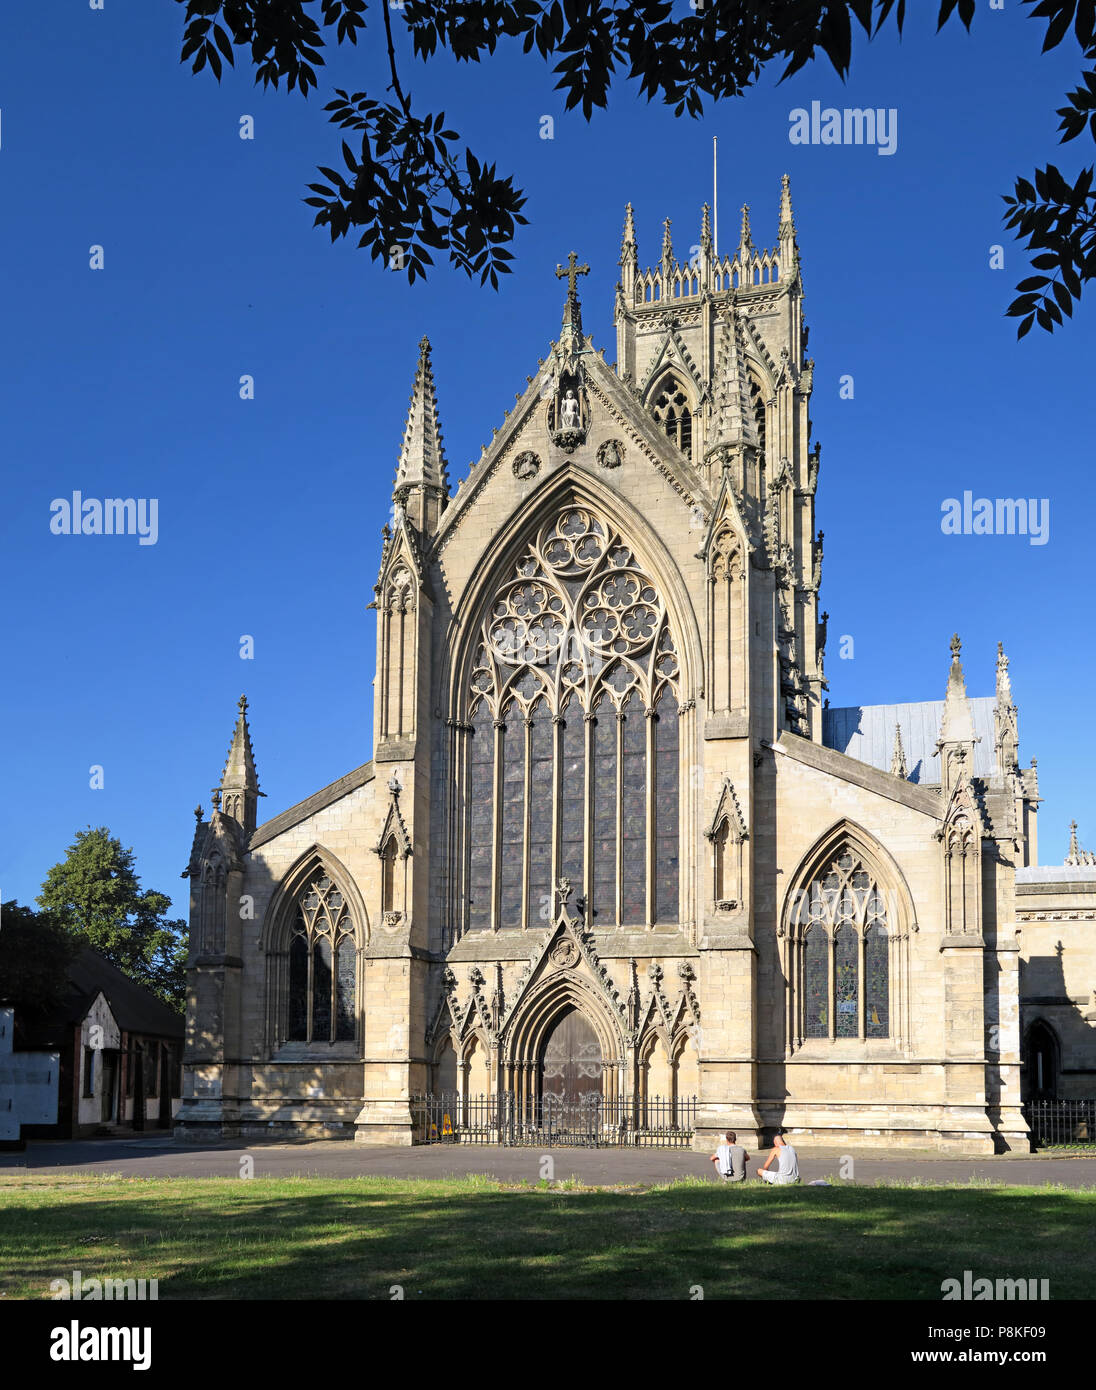 Doncaster Münster - St Georges, 9 Church St, Doncaster, South Yorkshire, England, UK, DN 1 1 RD Stockfoto